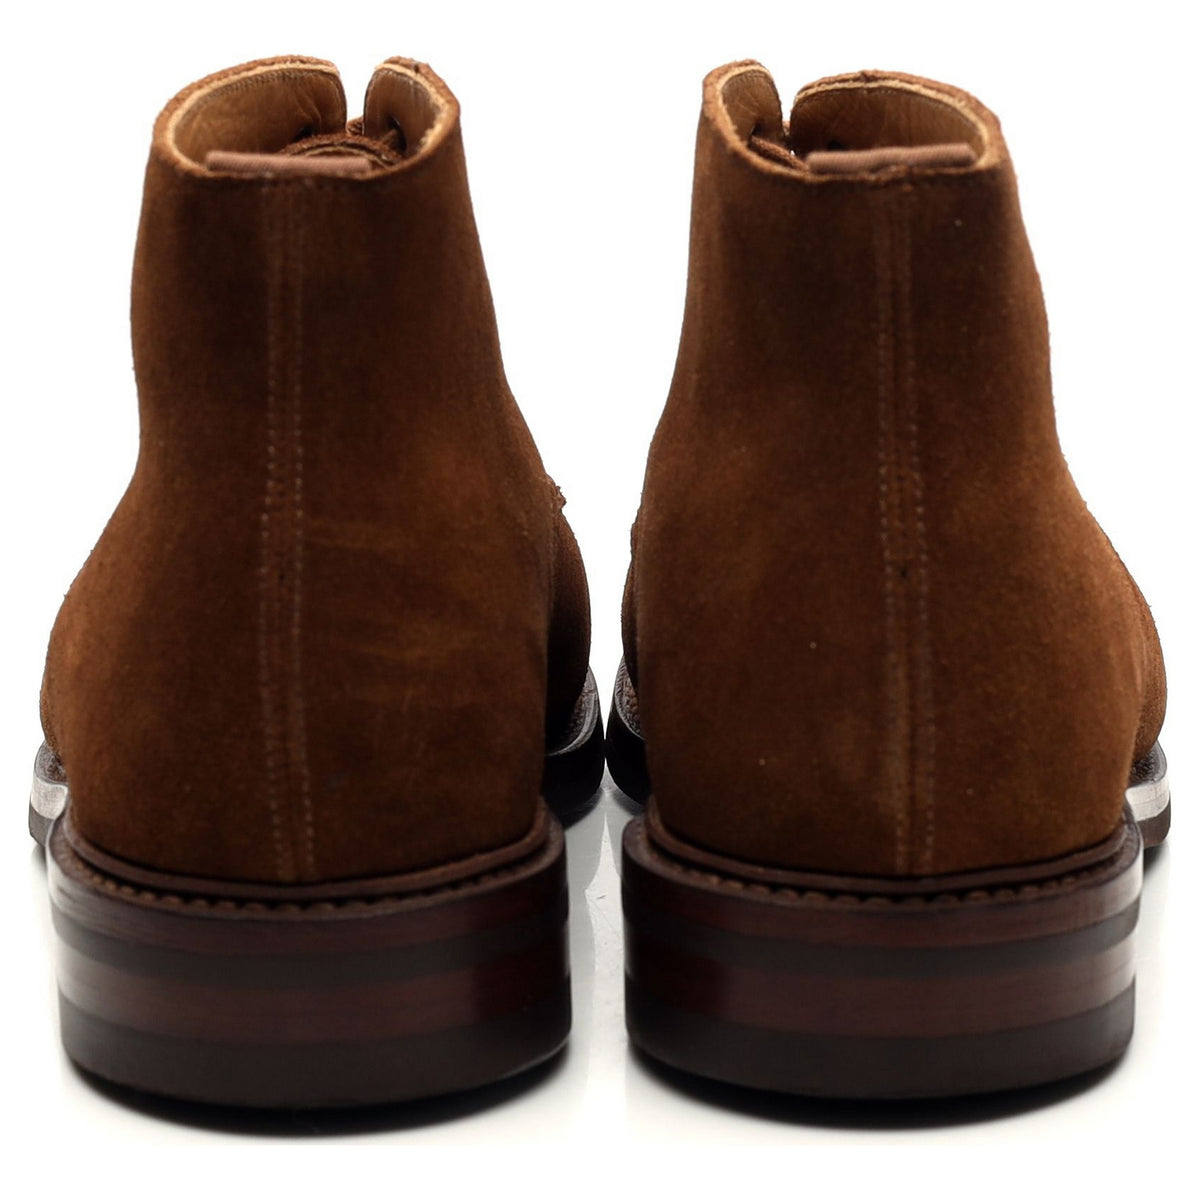 &#39;Humber&#39; Snuff Brown Suede Boots UK 7 E